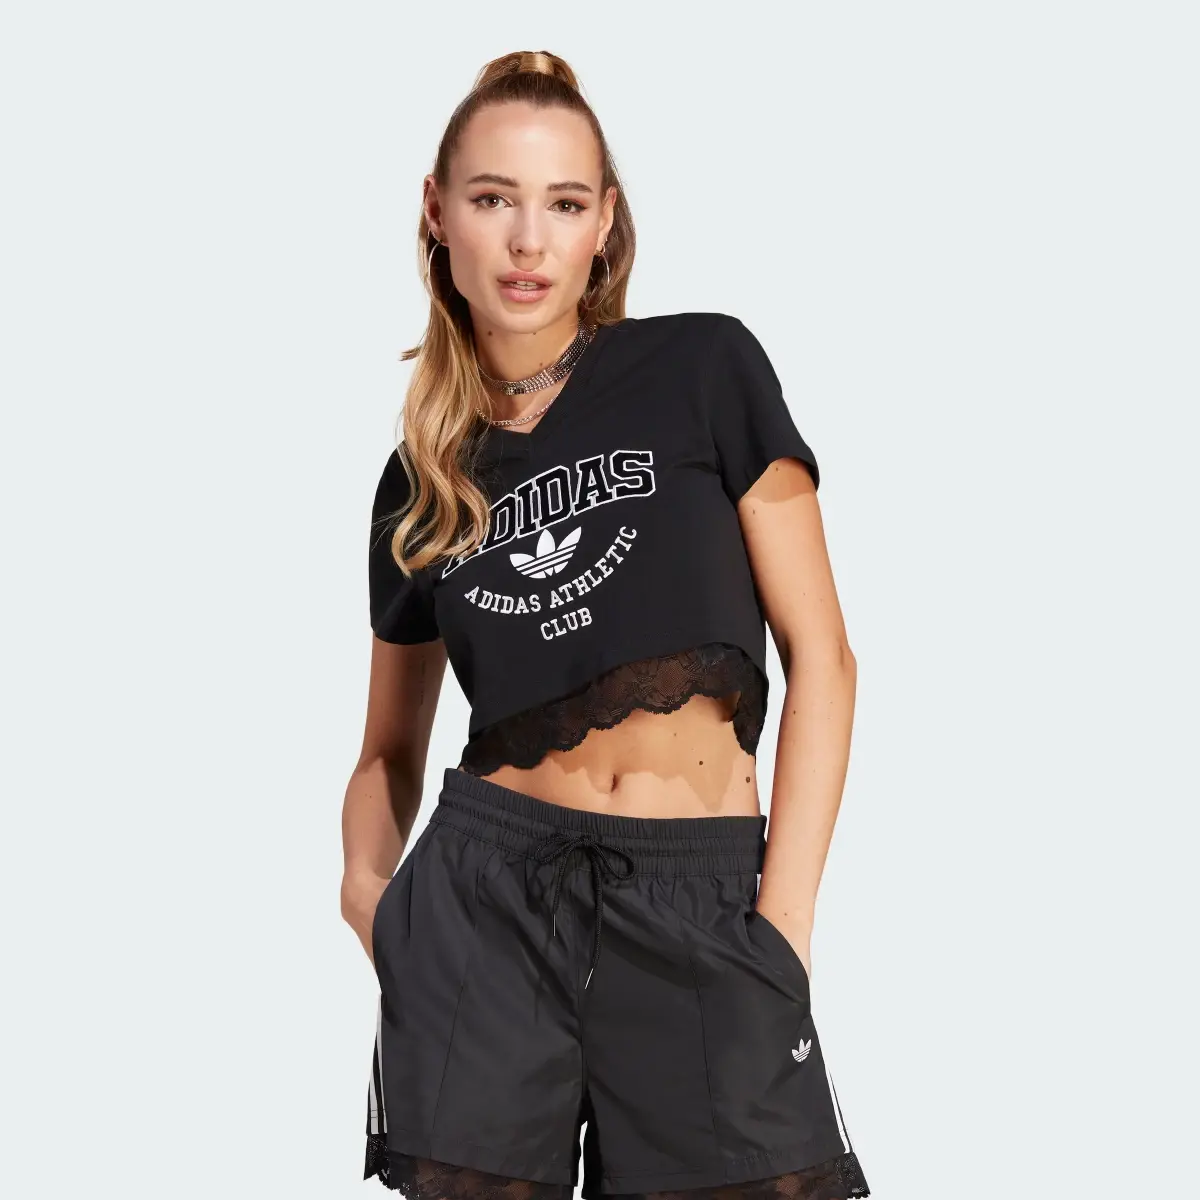 Adidas Cropped Lace Trim Tee. 2